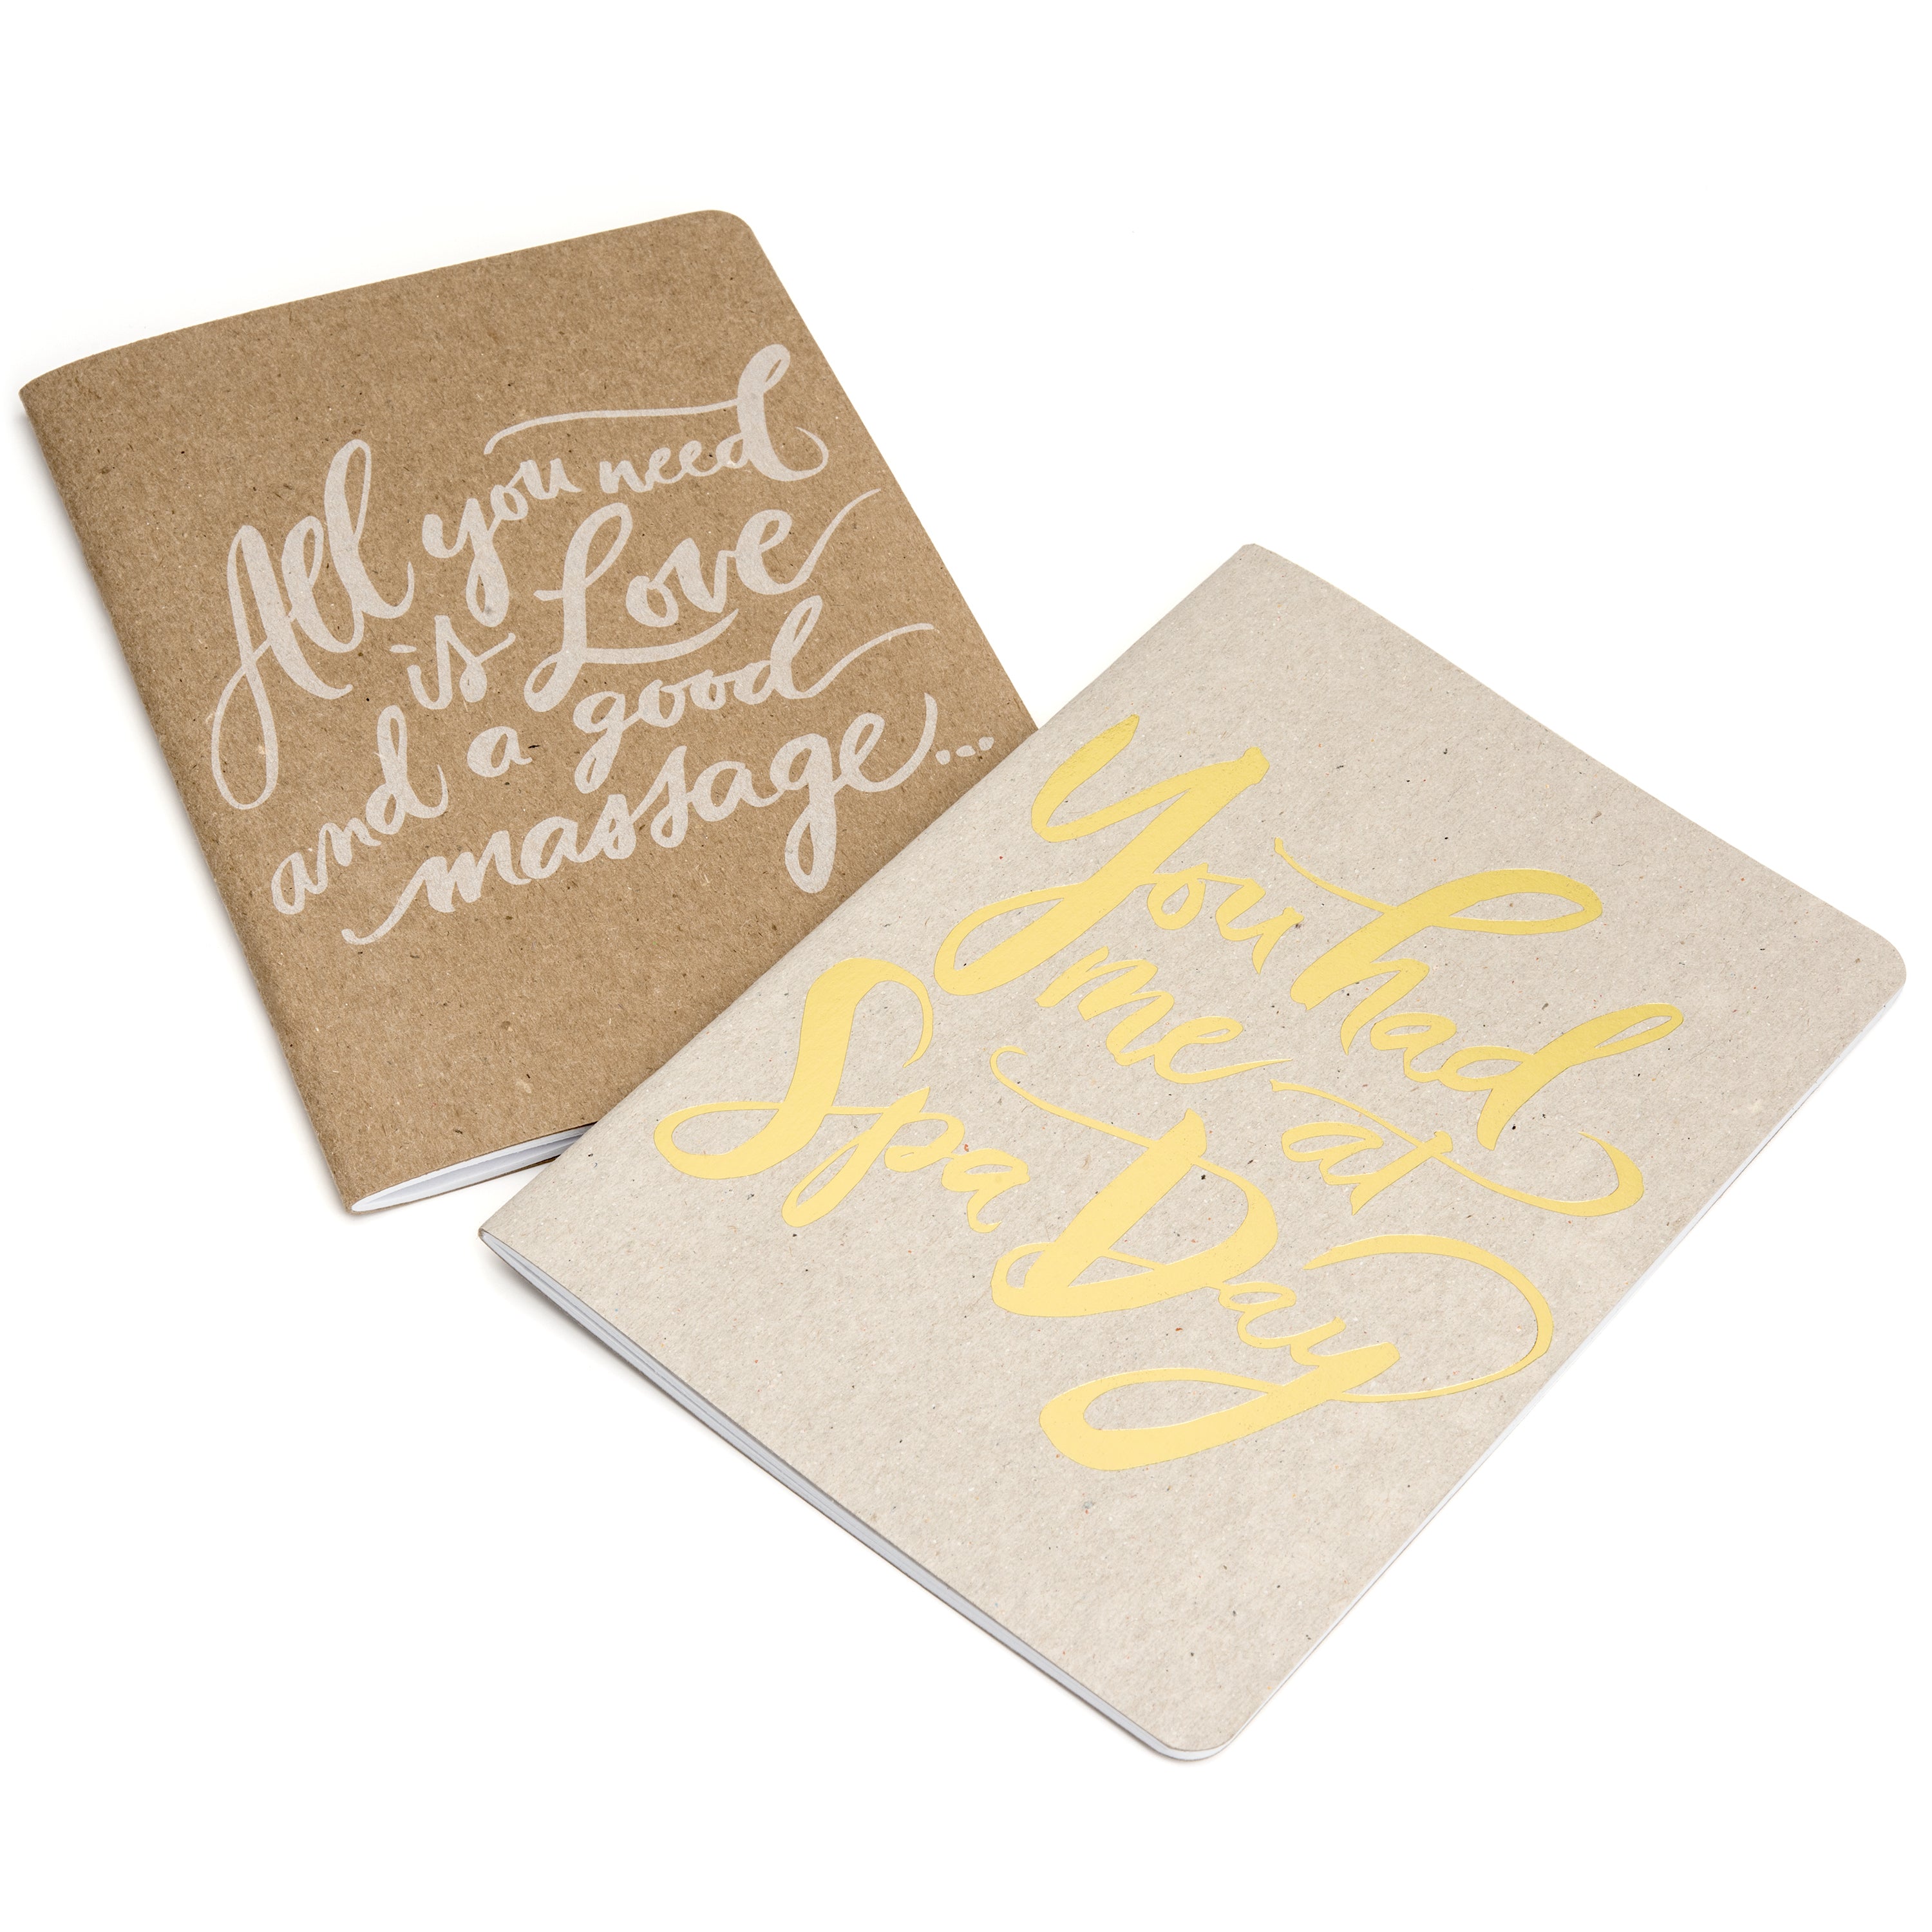 All you need is love and a good massage notebook | Scout Books